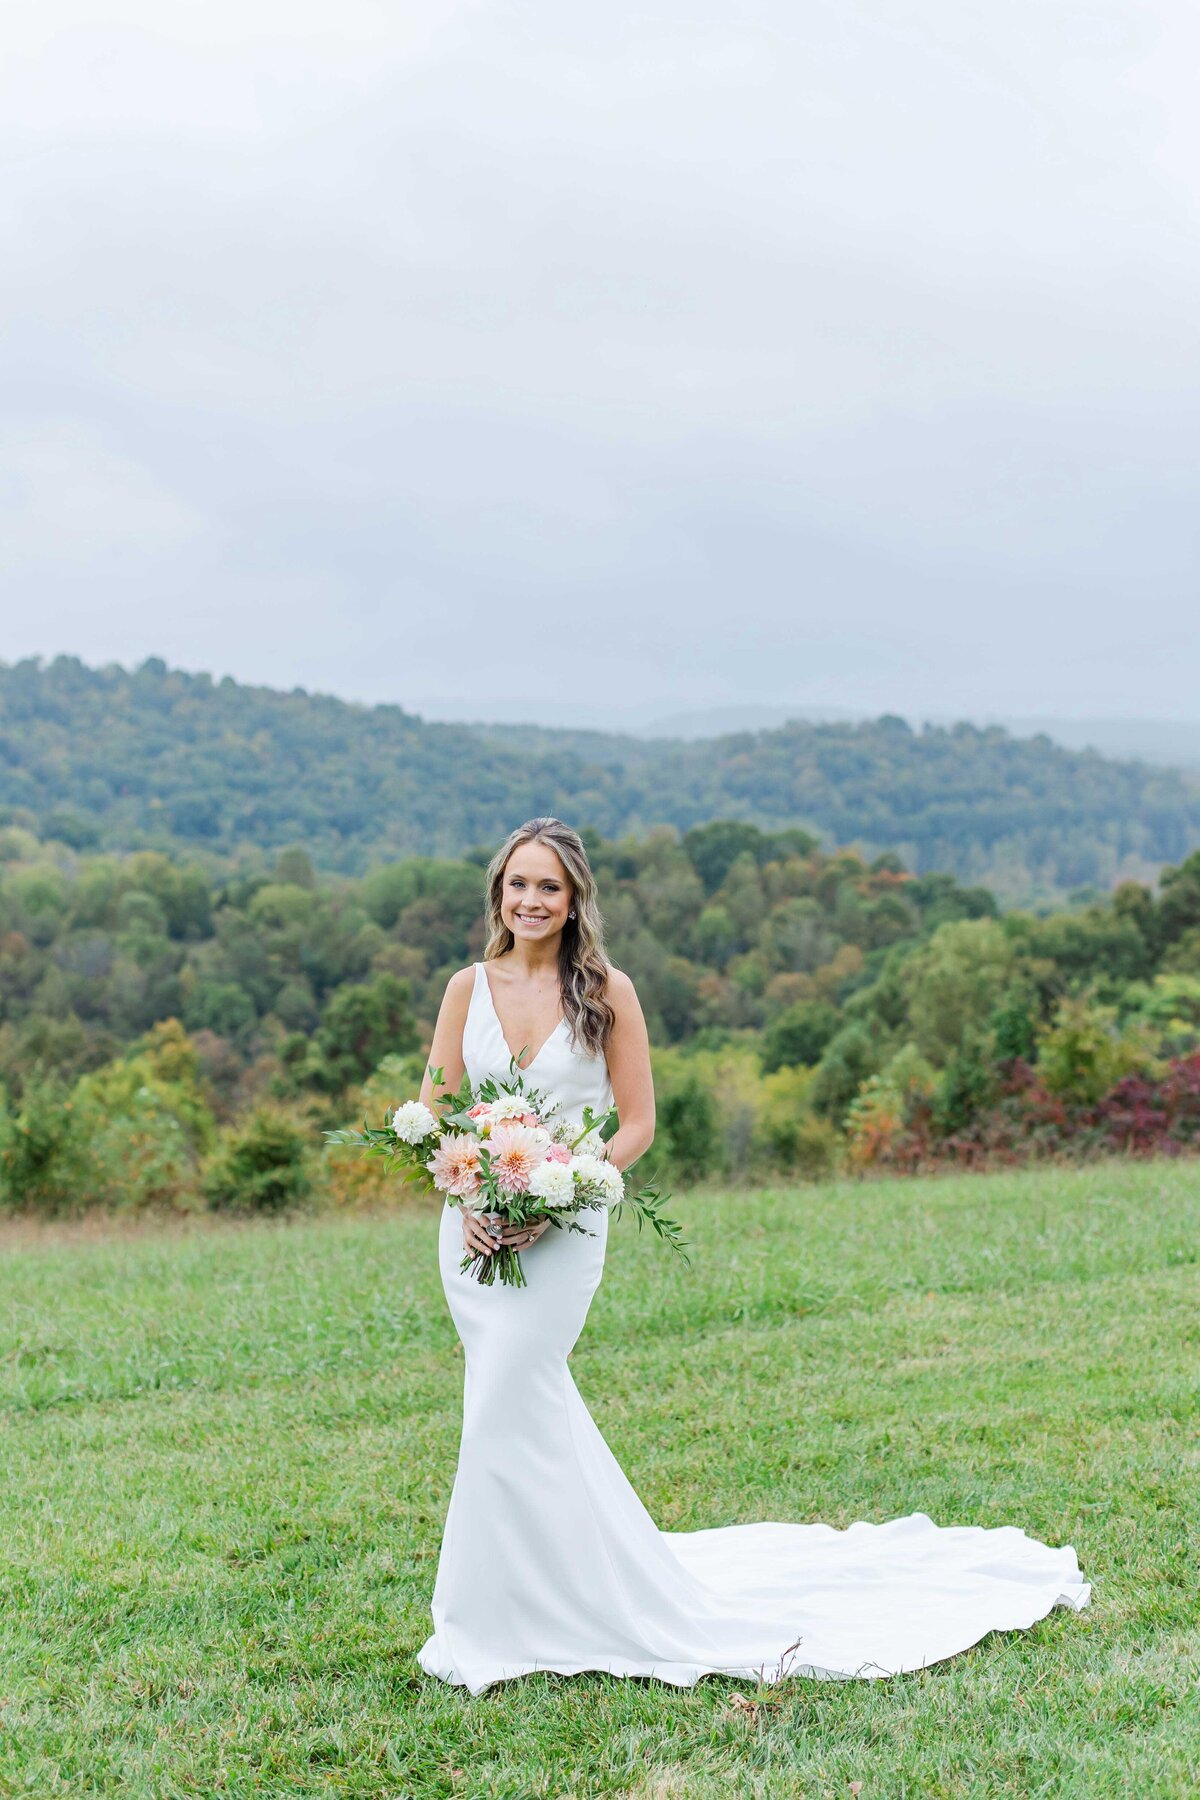 Bride wearing made with love wedding dress holding flower bouquet at chateau selah blountville tn